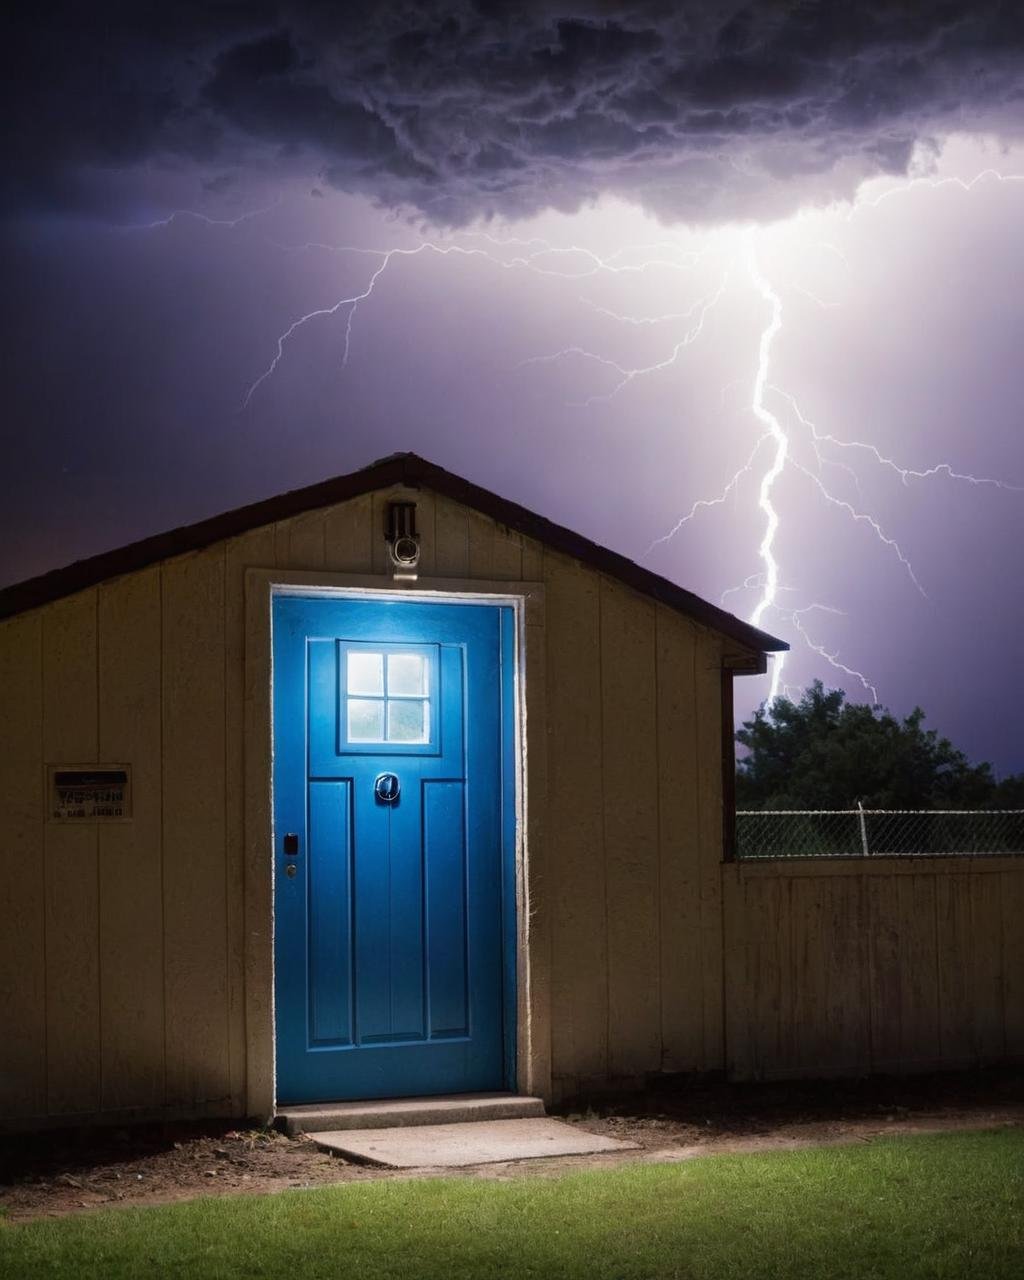 a building with a blue door and a lightning bolt in the background , outdoors, sky, cloud, no humans, window, night, night sky, scenery, fence, lightning